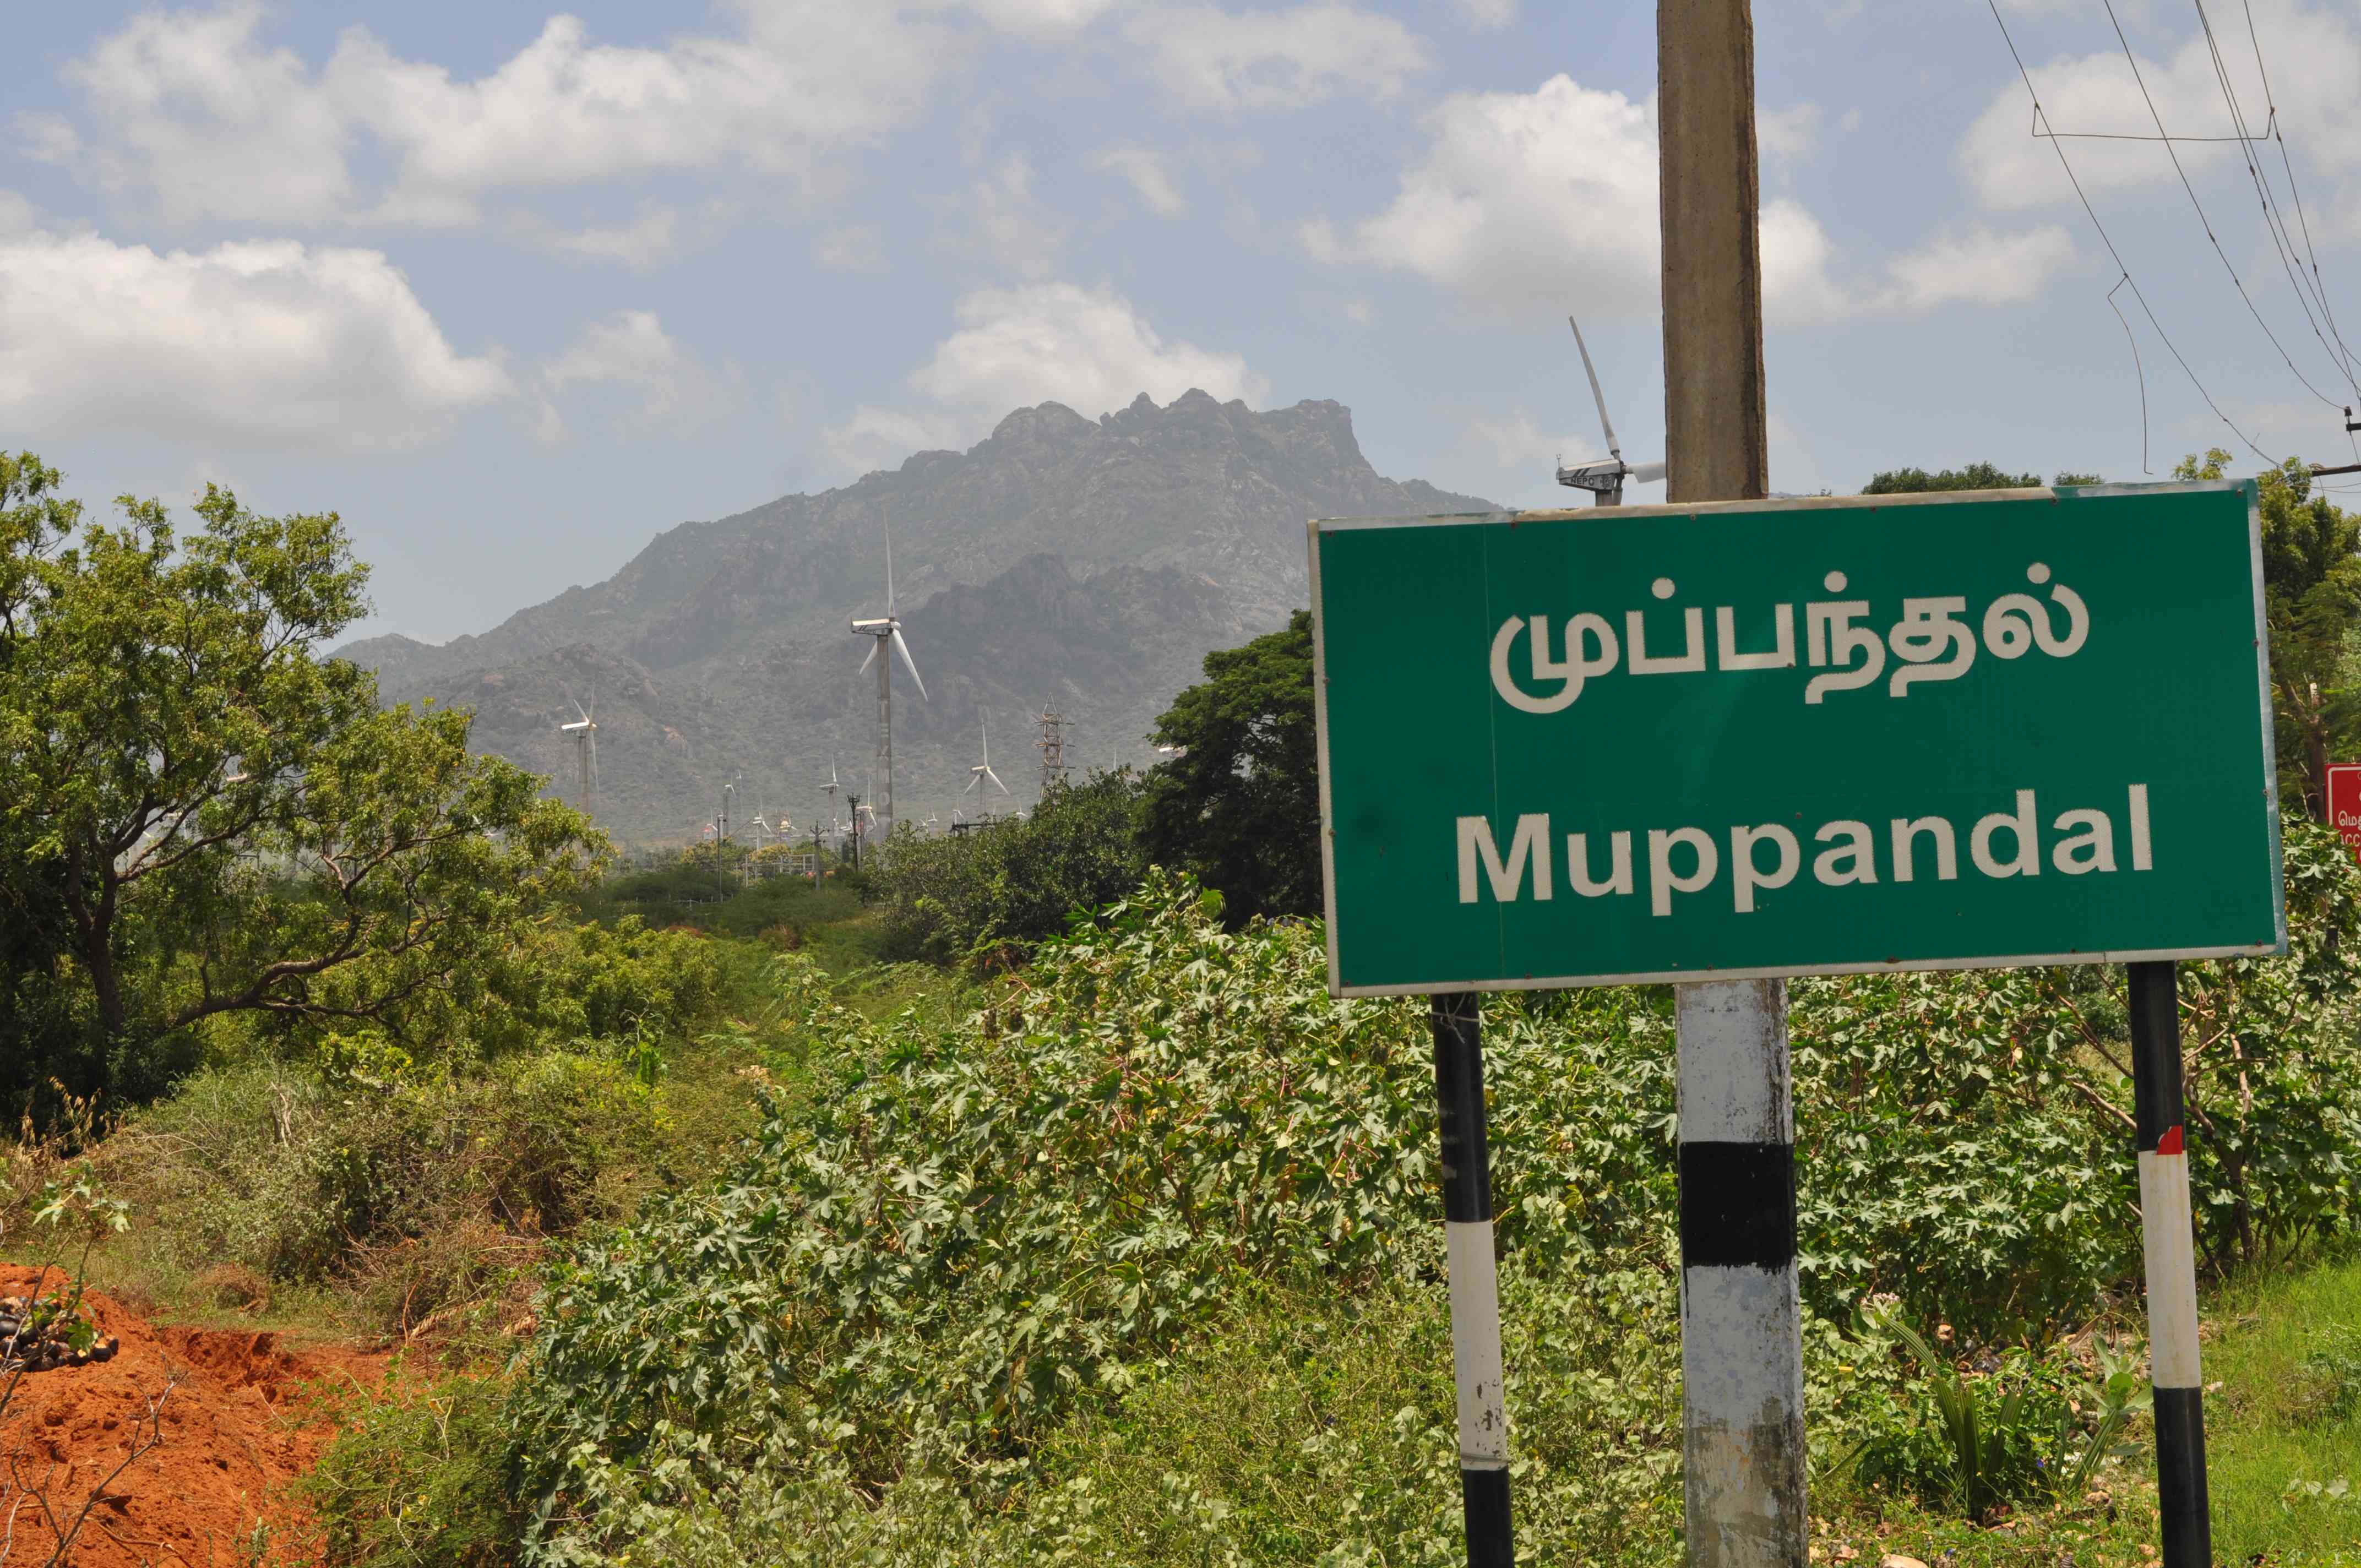 The road sign leading into Muppandal